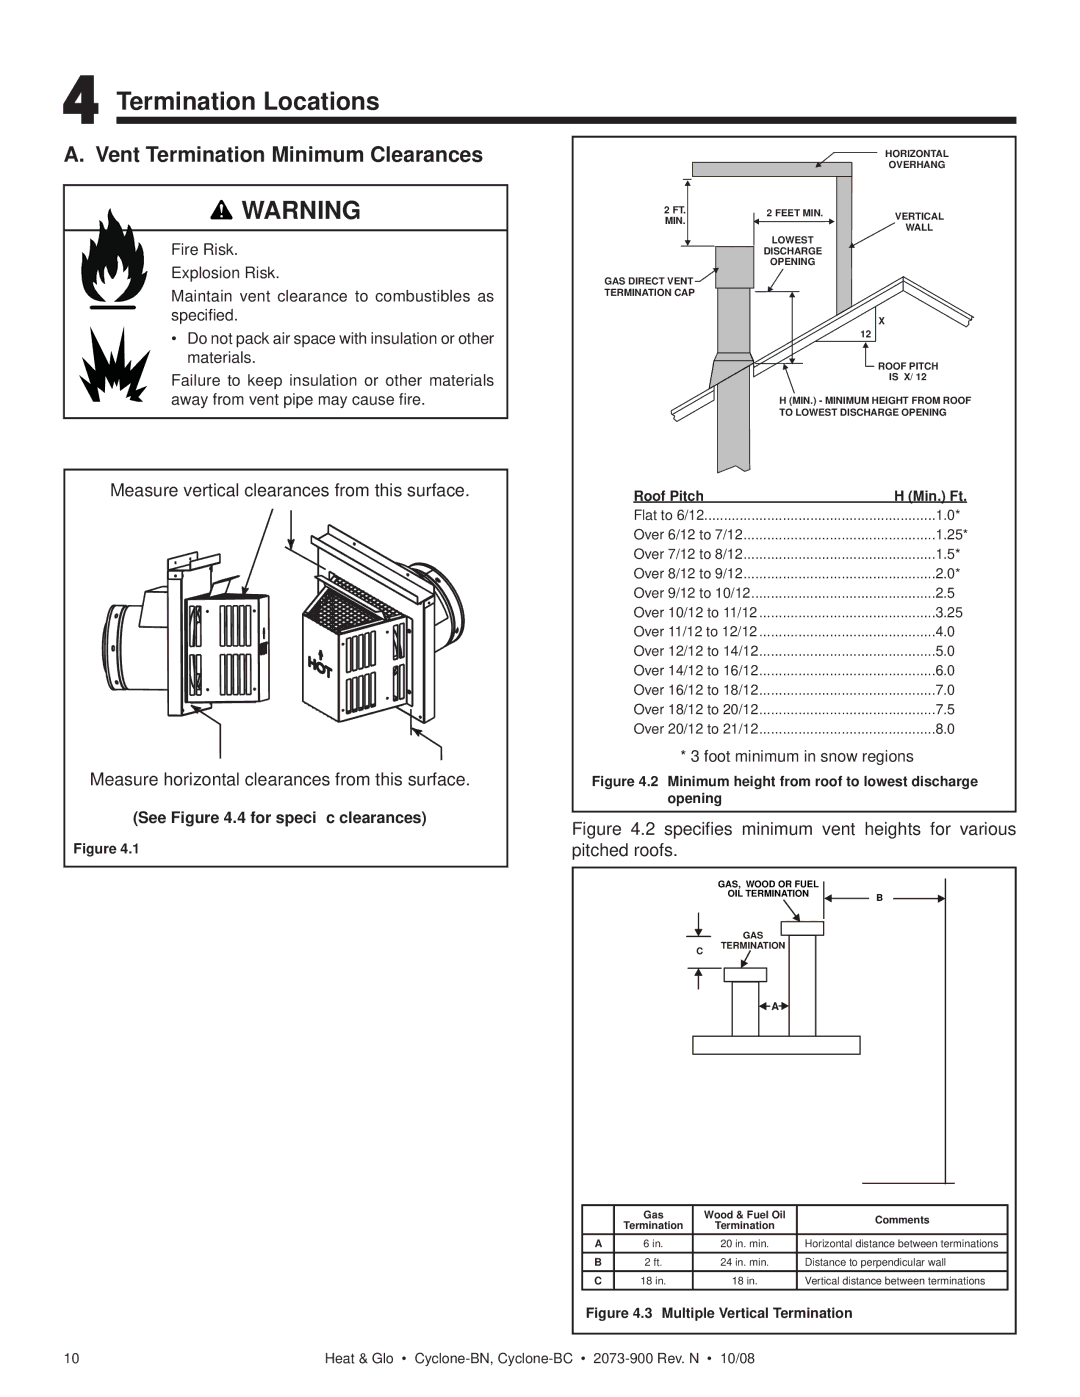 Hearth and Home Technologies Cyclone-BC, Cyclone-BN owner manual Termination Locations, Vent Termination Minimum Clearances 